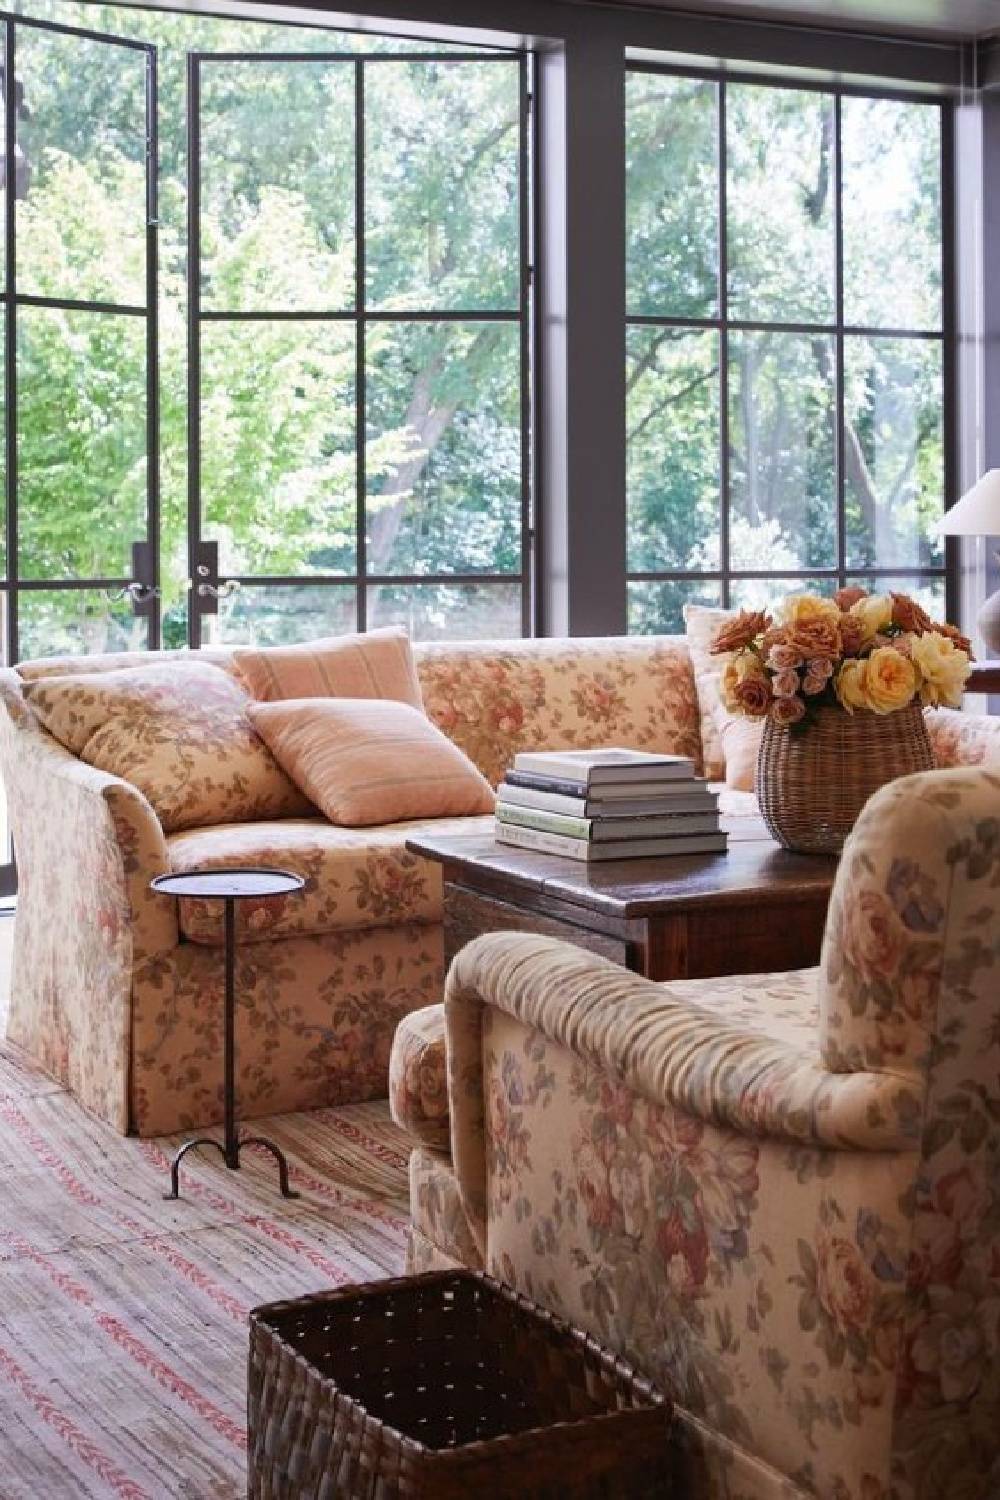 Keeping room sofas with floral upholstery. Timeless interior design by Shannon Bowers with nods to European antiques, patina, understated elegance, and sophisticated simplicity. #shannonbowers #timelessinteriors